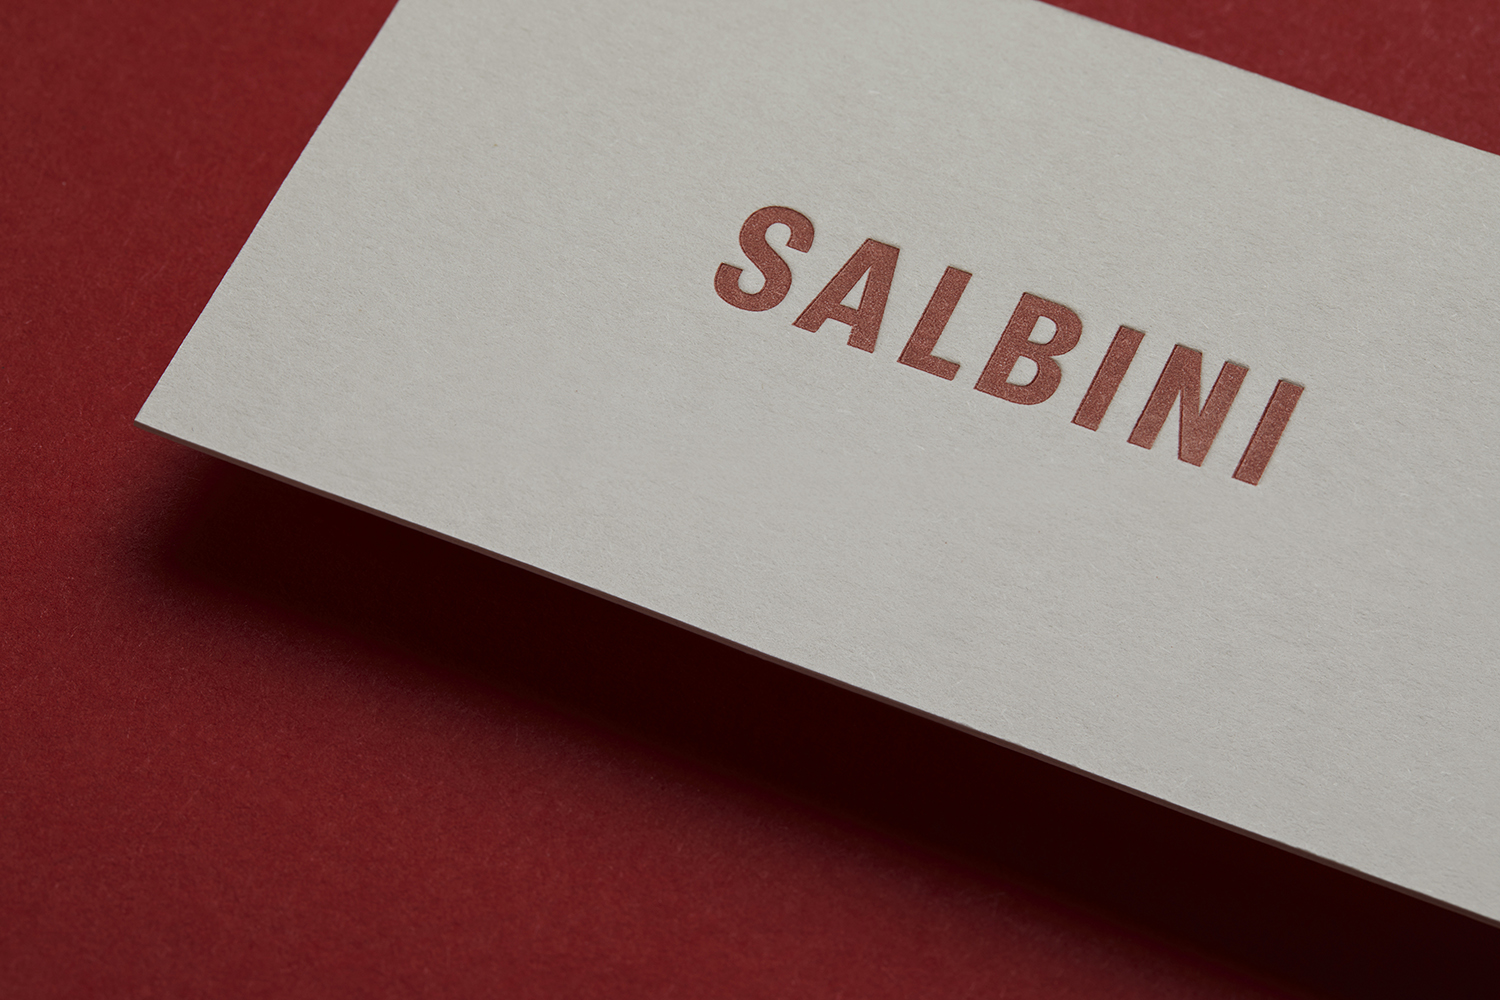 Logotype and letterpress business card by Studio Brave for Italian online furniture retailer Salbini.